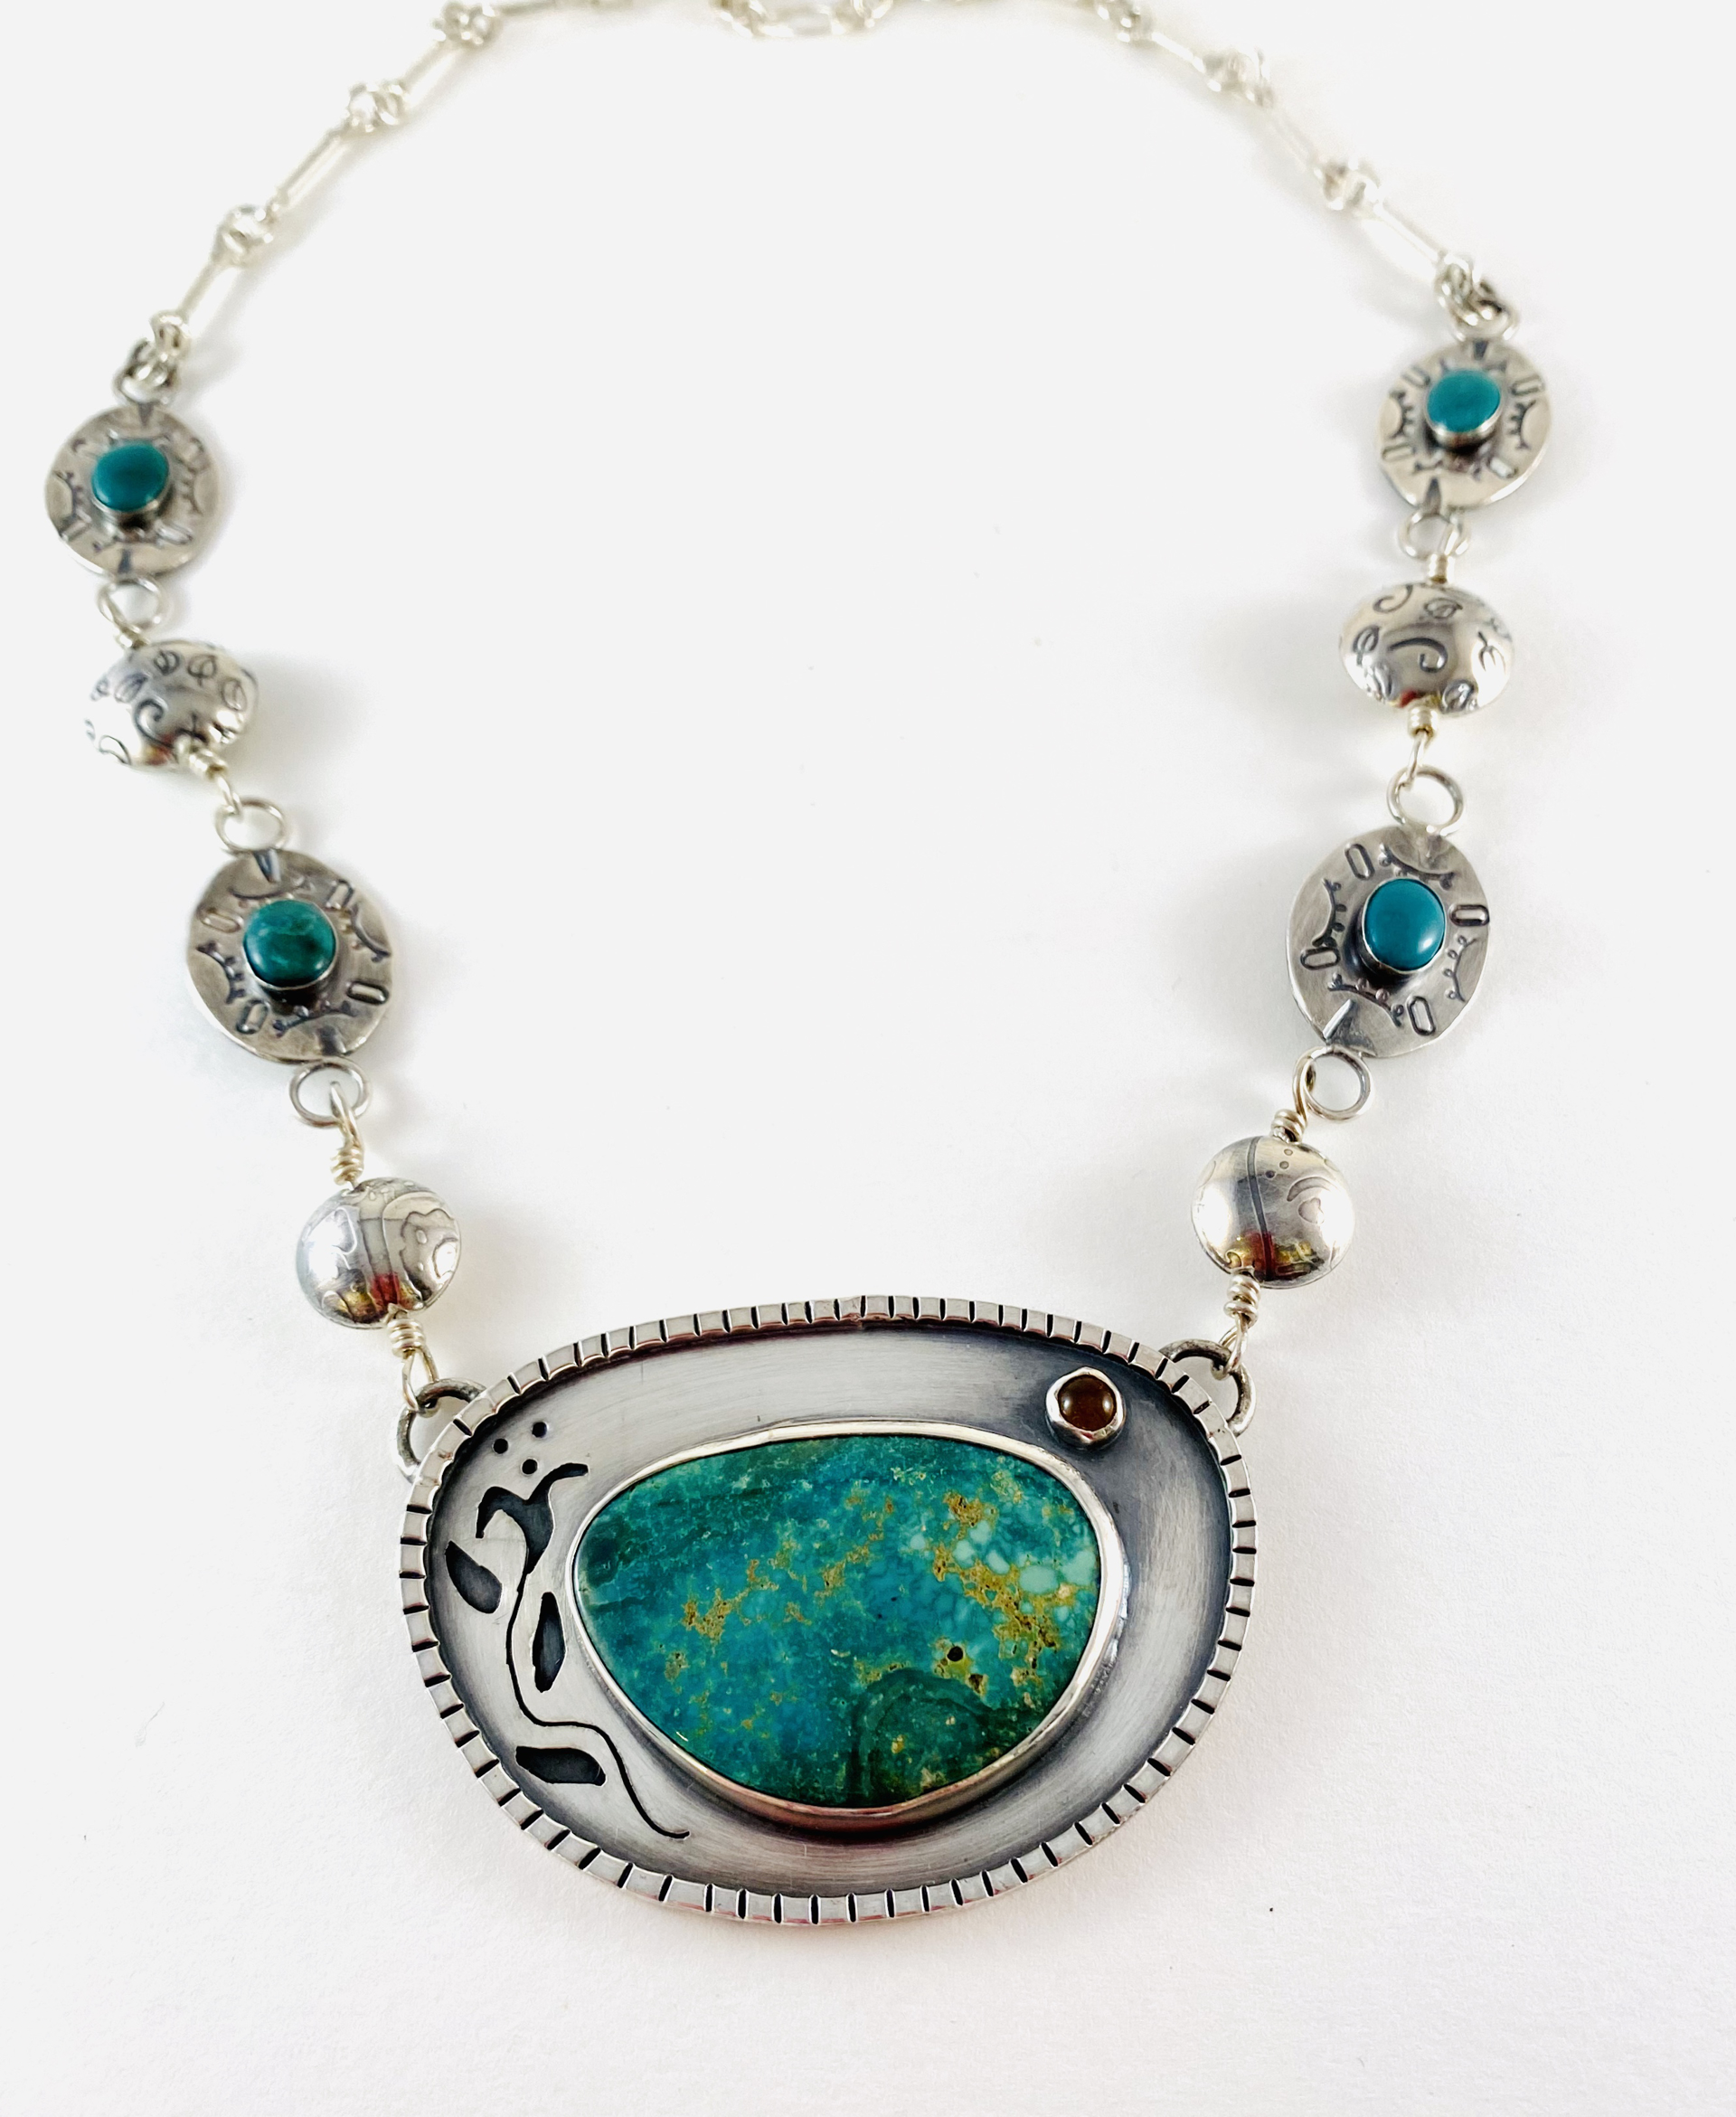 #111 Silver and Turquoise Pendant, Hand made silver beads, Hand Textured Silver and Turquoise link Necklace by Anne Bivens